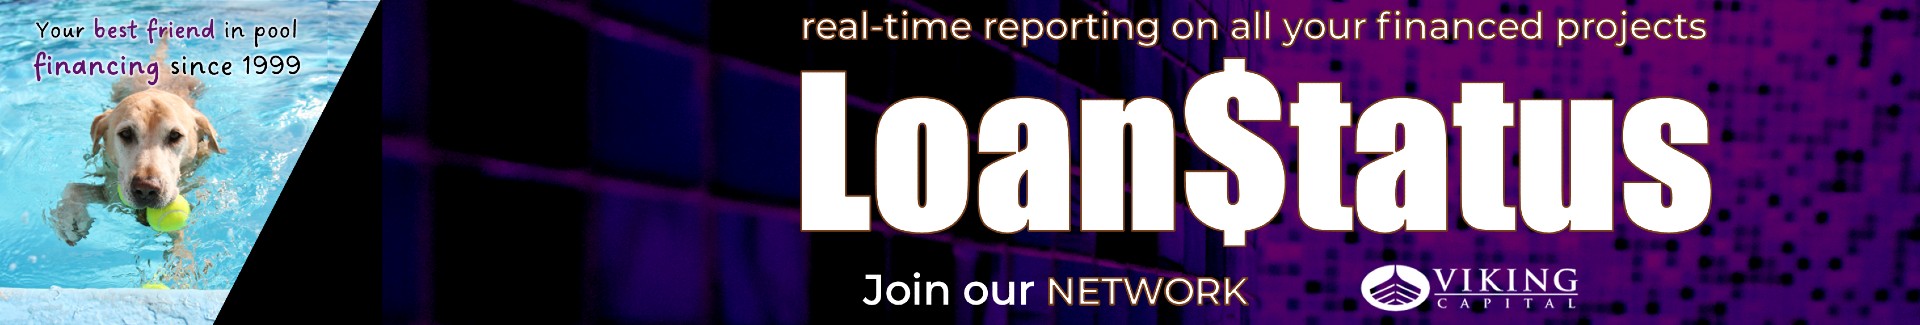 viking capital loan tracking portal loan status. real-time reporting on all your financed projects